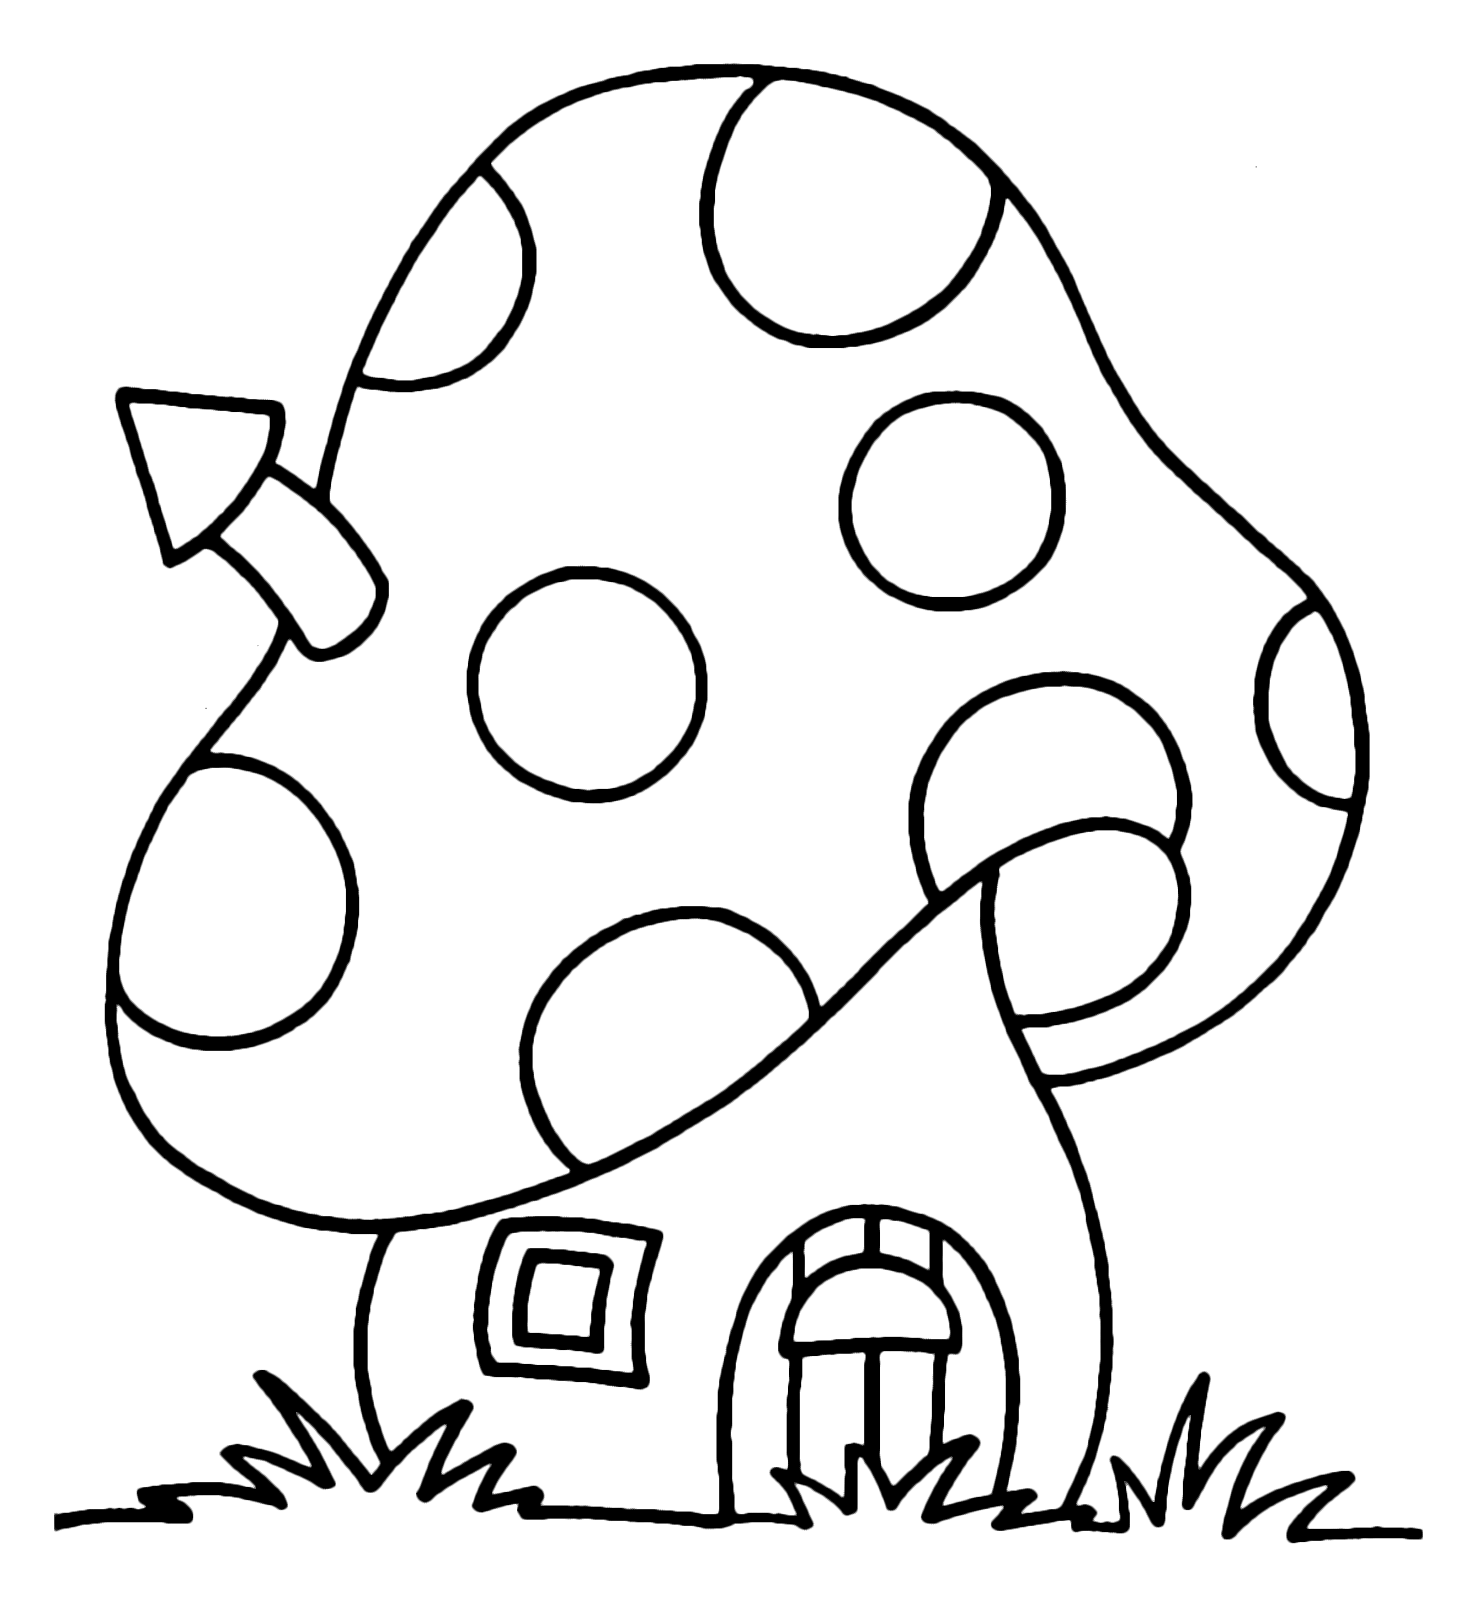 Easy Coloring Pages ⋆ coloring.rocks!